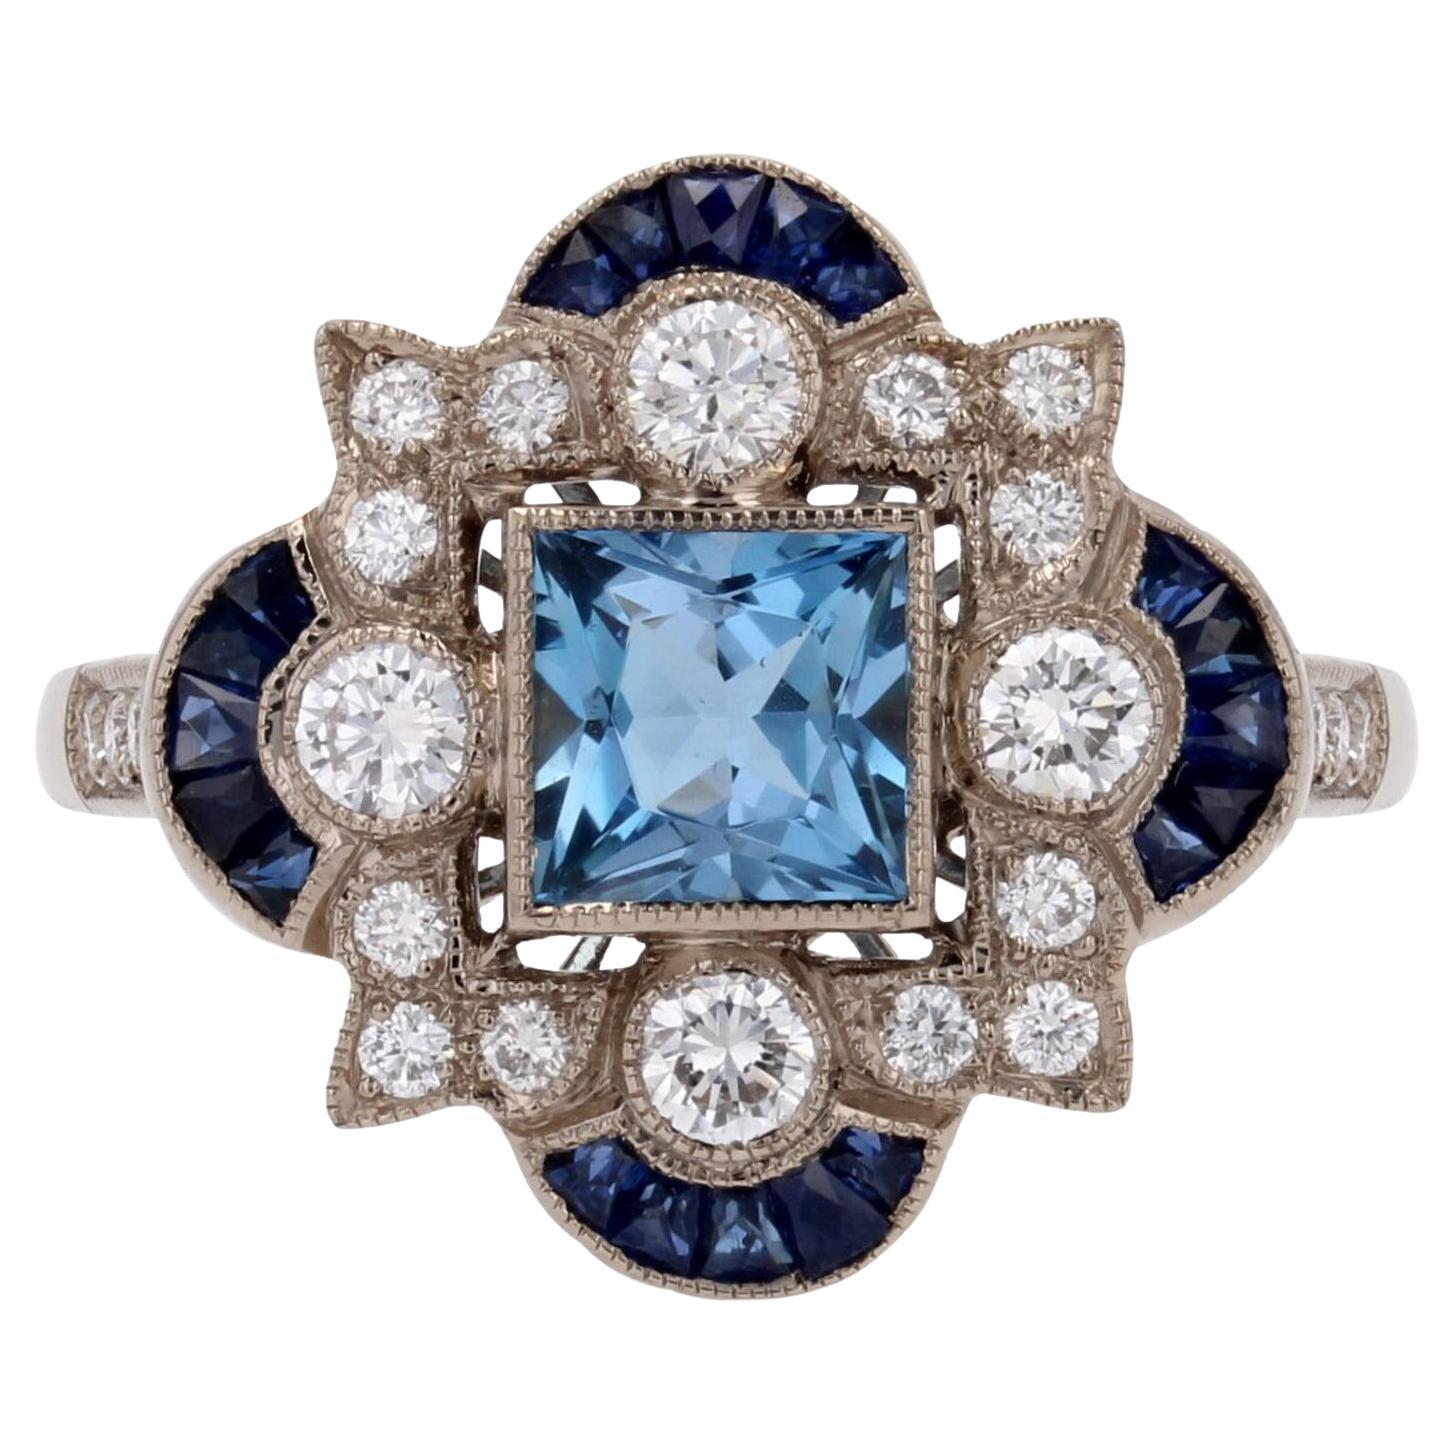 New Art Deco Style Aquamarine Calibrated Sapphires Diamonds 18K White Gold Ring For Sale